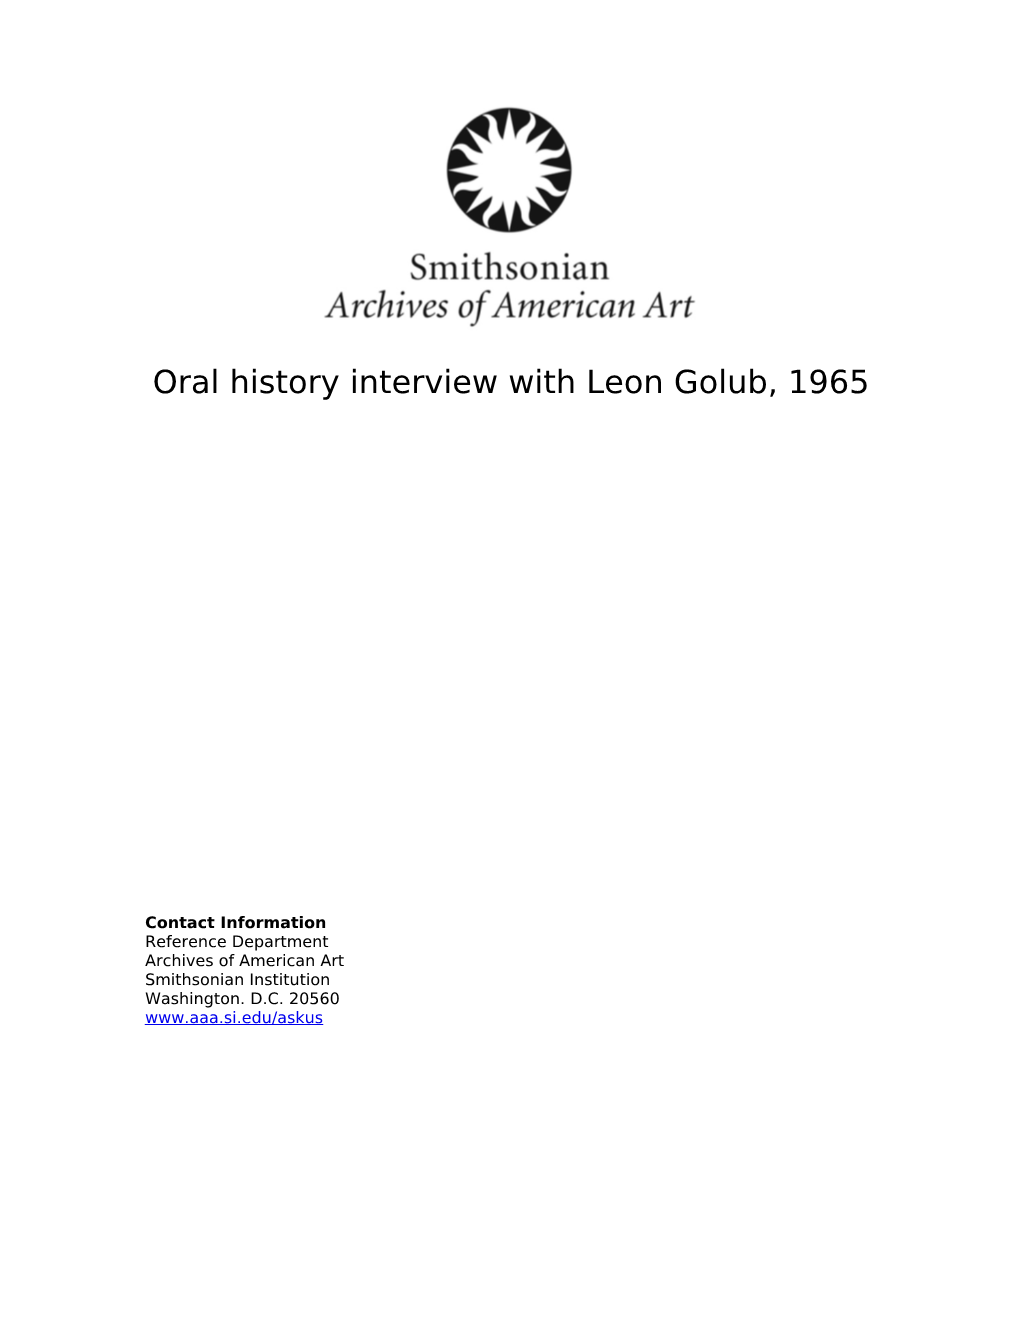 Oral History Interview with Leon Golub, 1965